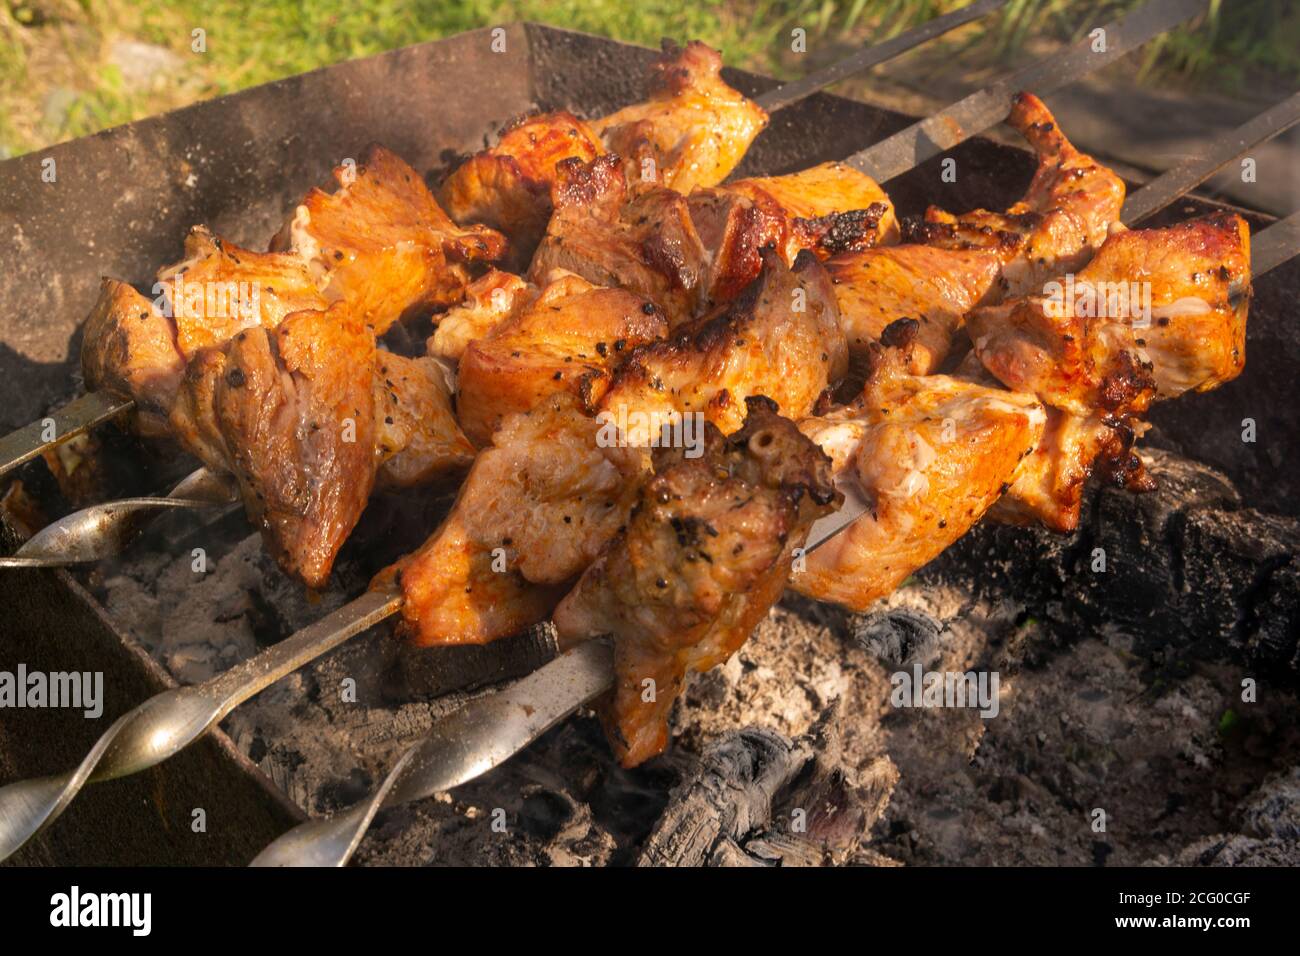 Juicy, fragrant kebabs on the grill Stock Photo